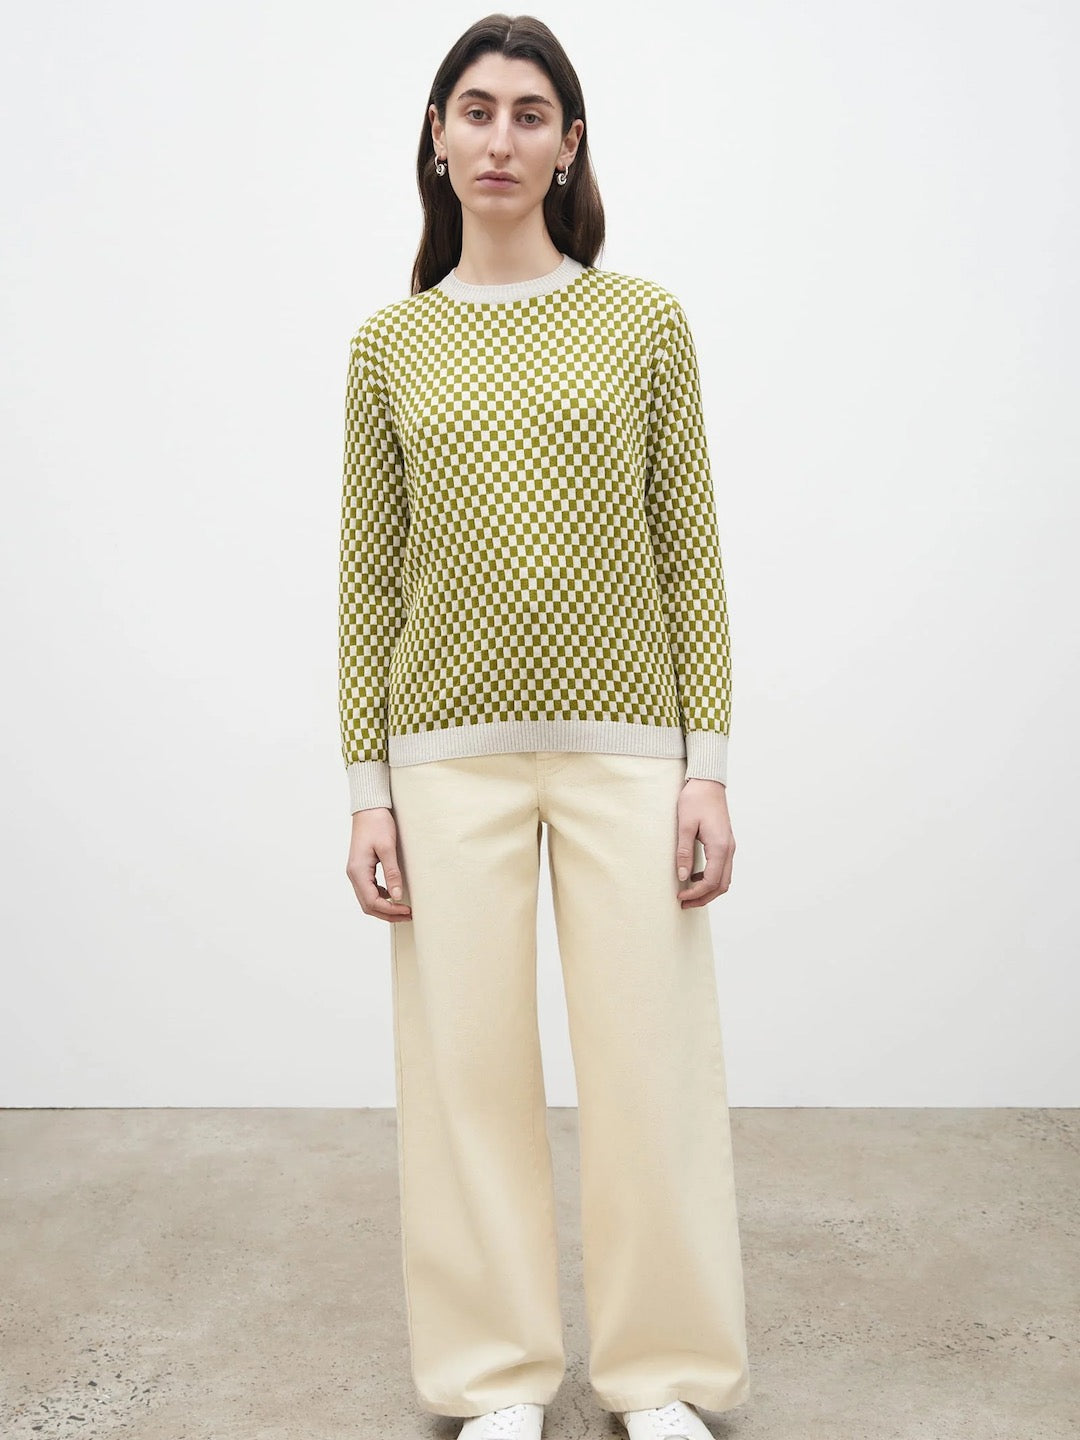 The model is wearing a Kowtow Checkerboard Knit Crew – Lawn Check sweater and cream wide leg pants.